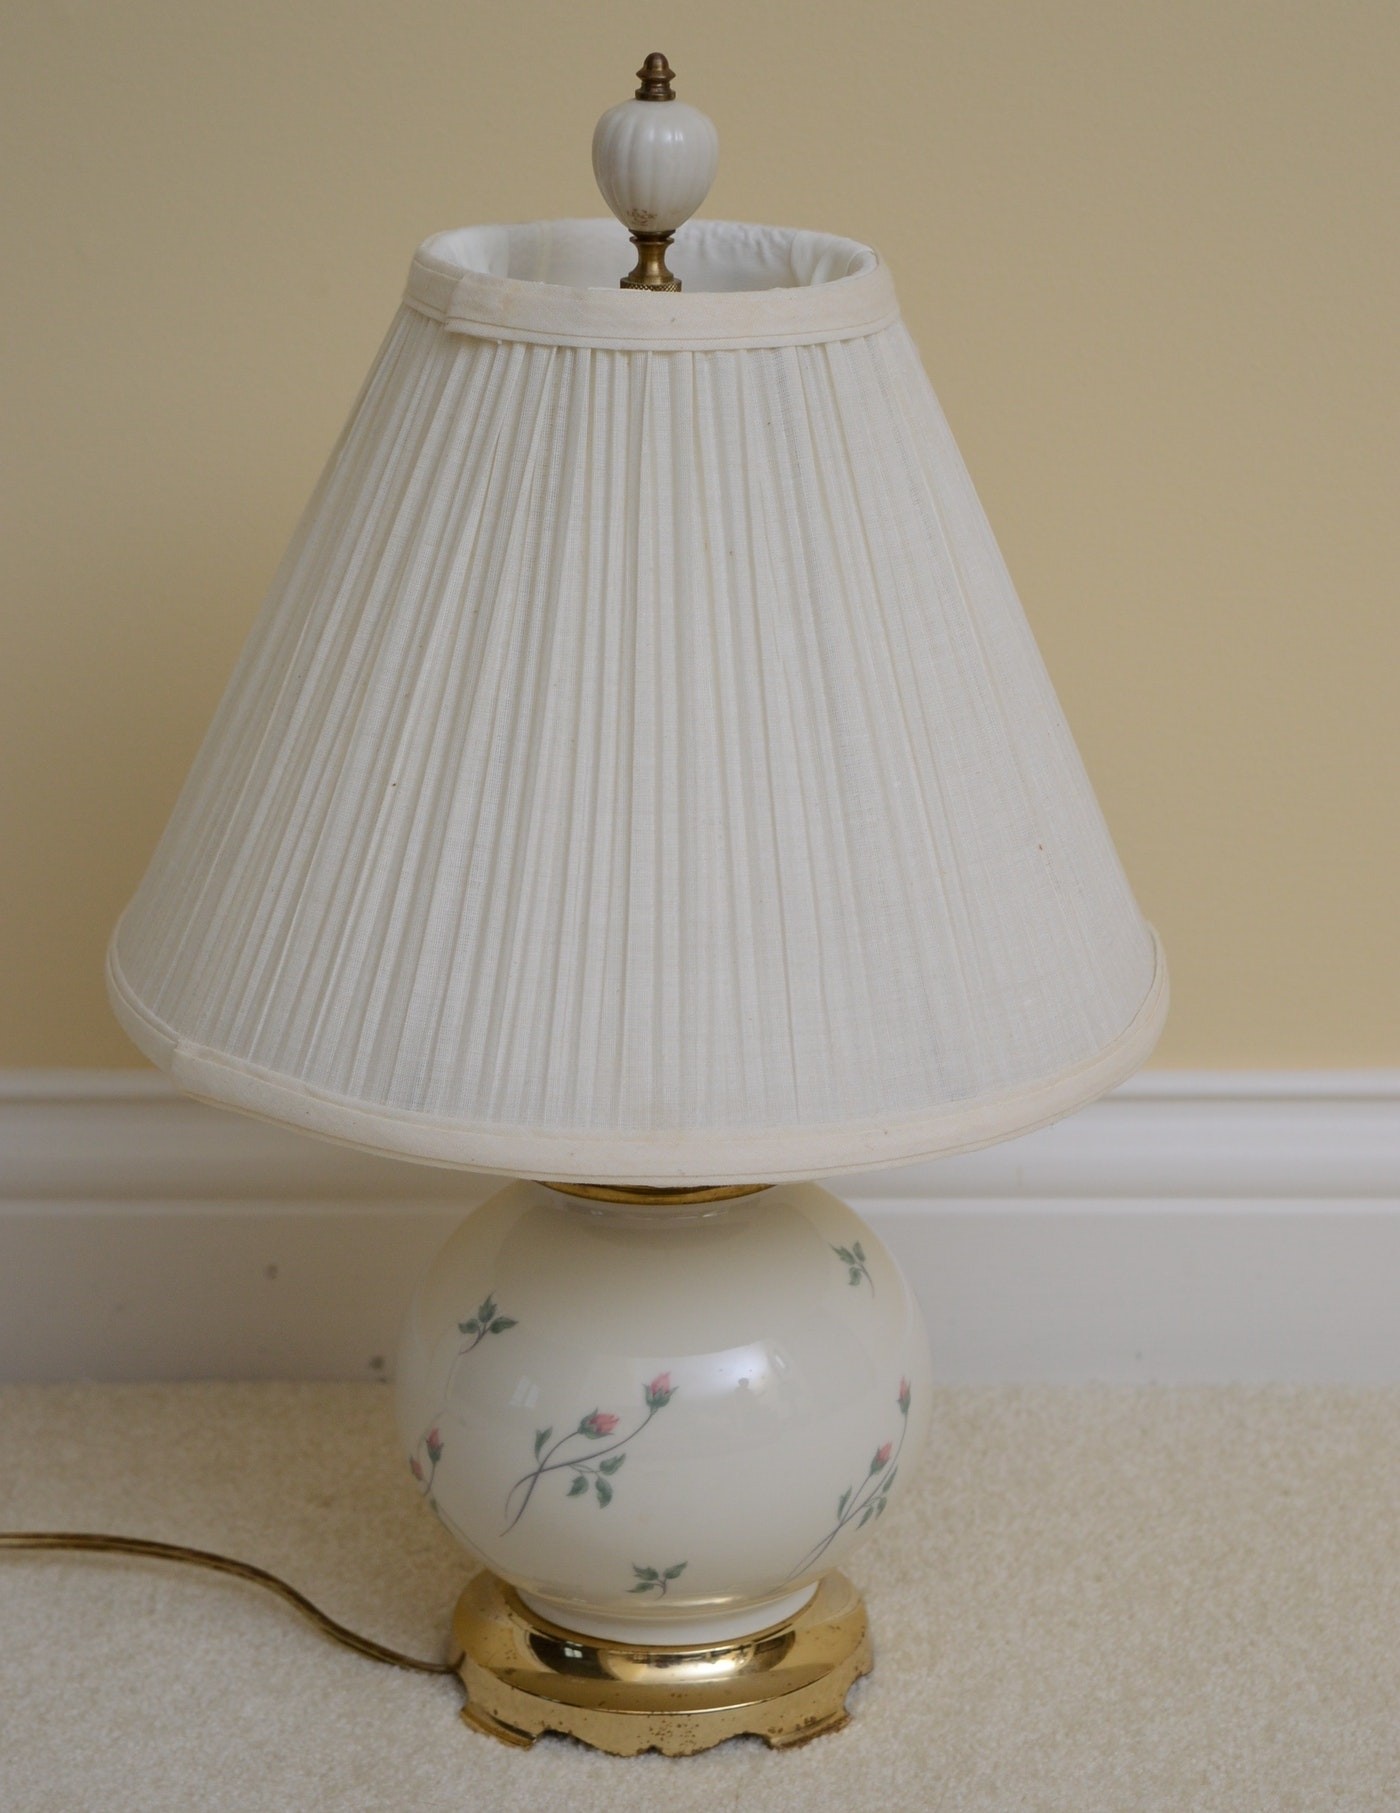 Wedgwood and lenox table lamps with vintage porcelain lamp